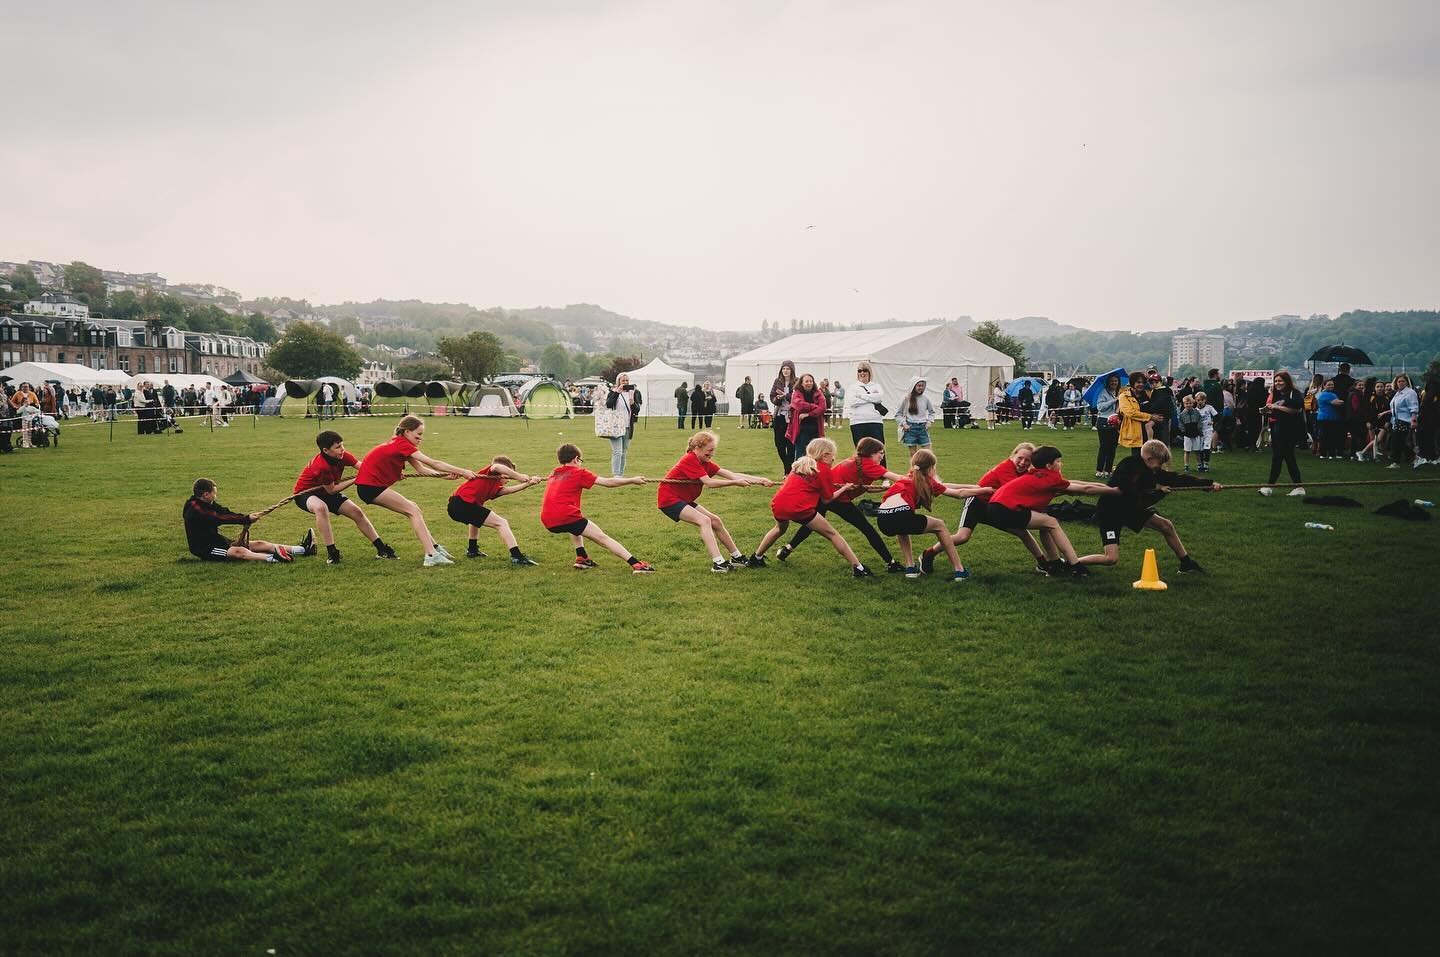 Gourock Highland Games, with the Moorfoot Primary School crew, and the @leicauk #Q3

#leicaphotography #leicaq3photography #gourock #inverclyde #scotland @discoverinverclyde @leicauk